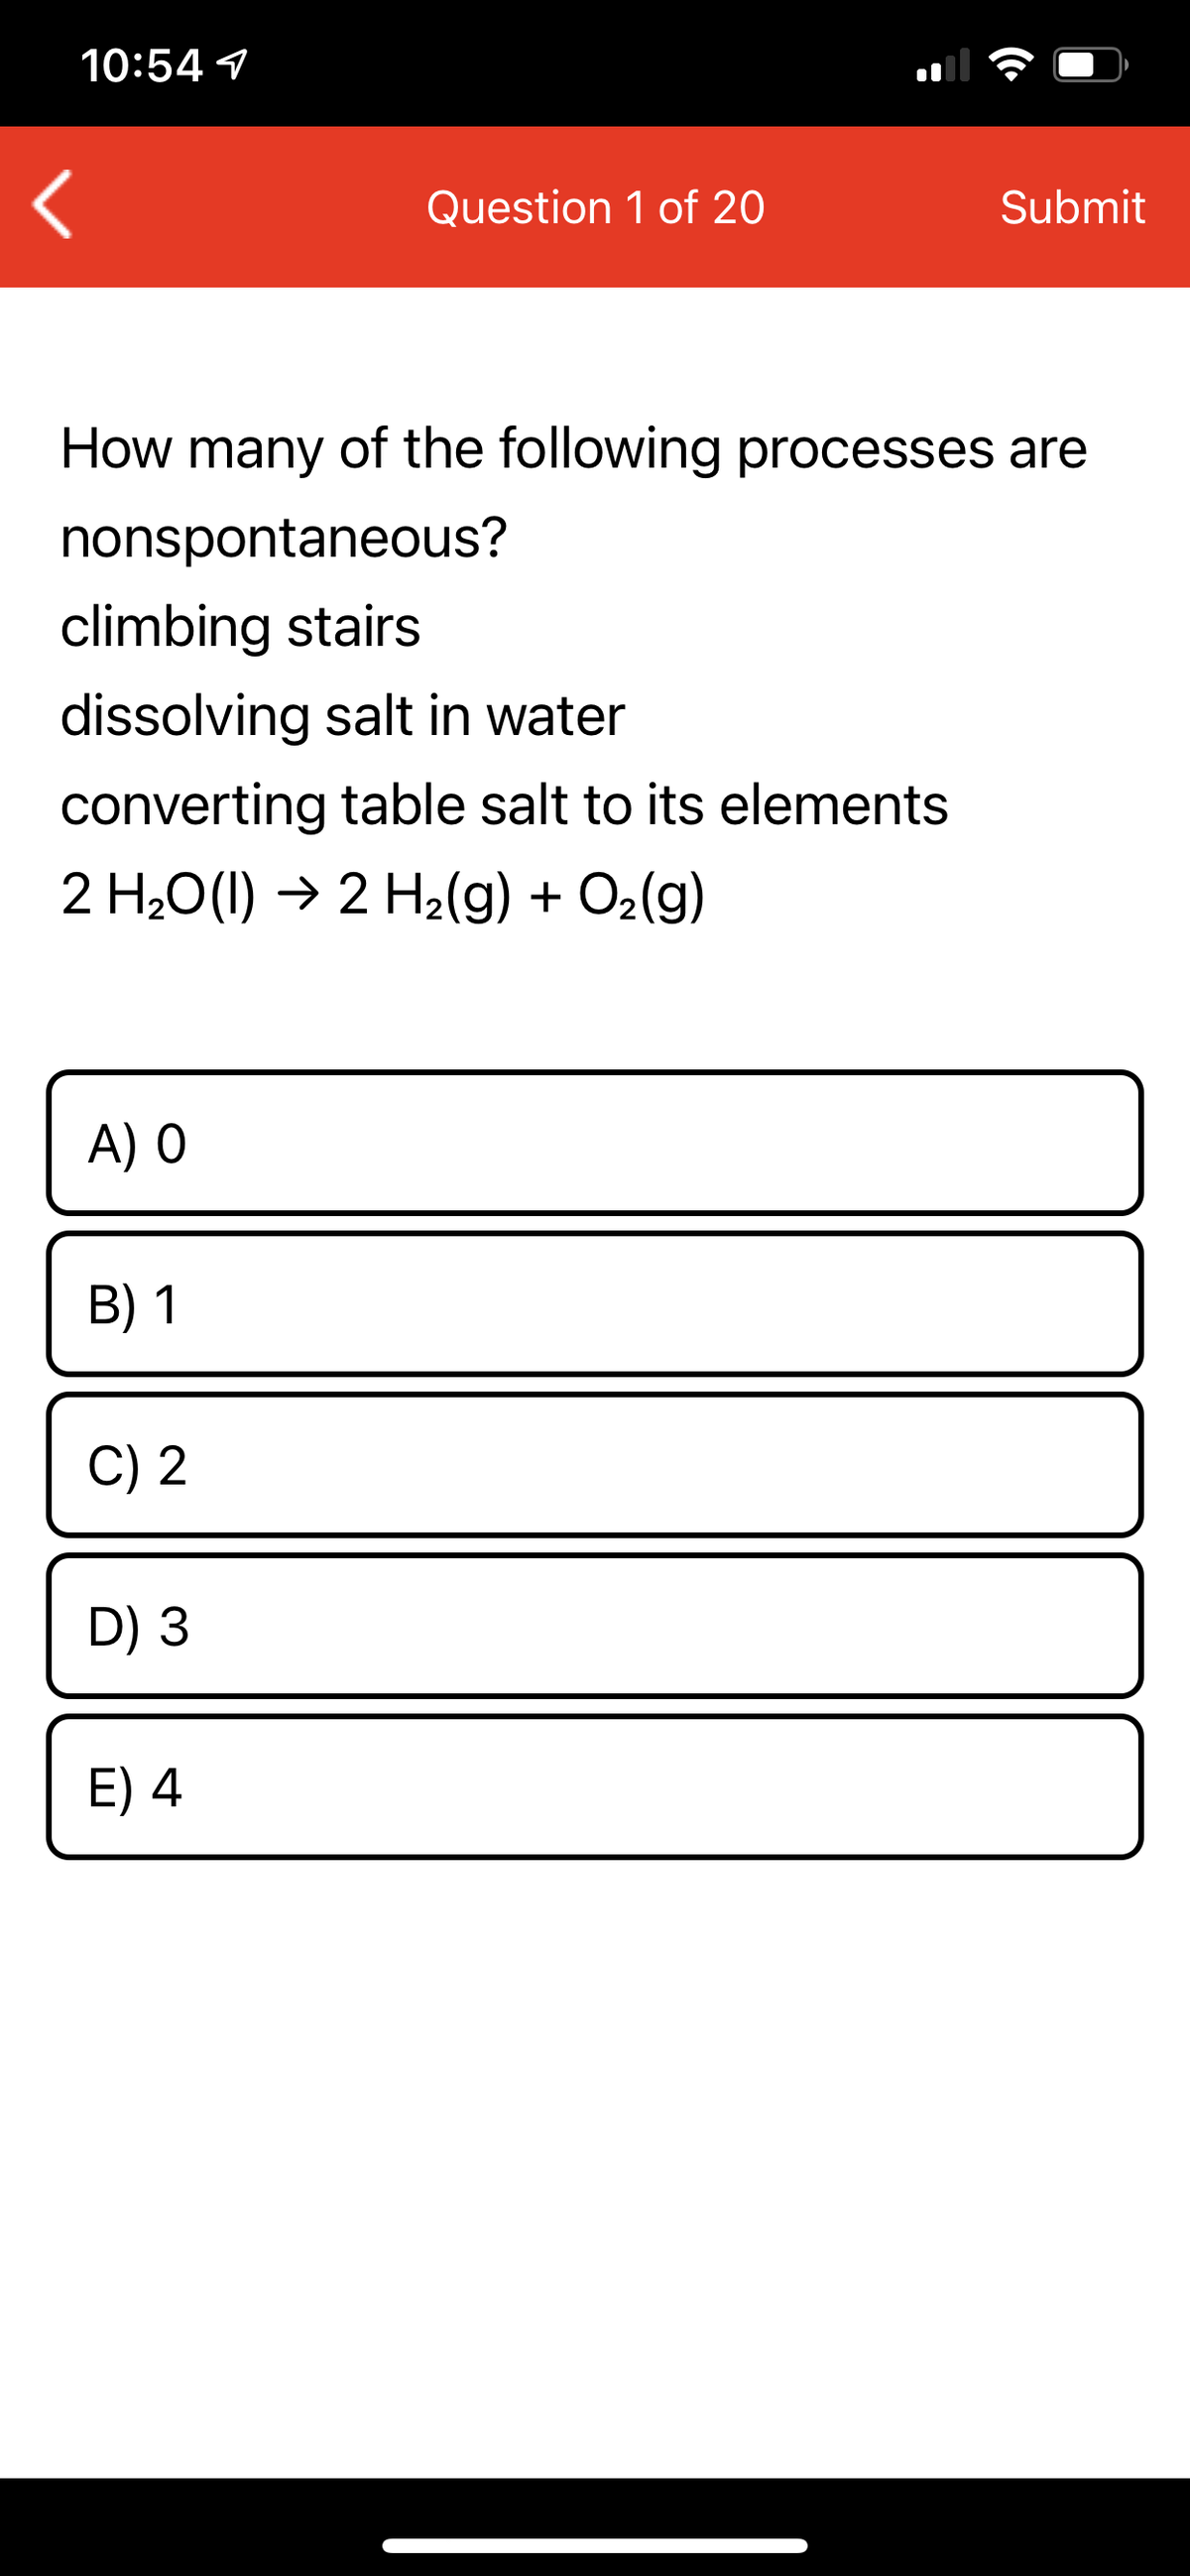 10:54 1
Question 1 of 20
Submit
How many of the following processes are
nonspontaneous?
climbing stairs
dissolving salt in water
converting table salt to its elements
2 H20(1) → 2 H2(g) + O2(g)
A) O
В) 1
C) 2
D) 3
E) 4
